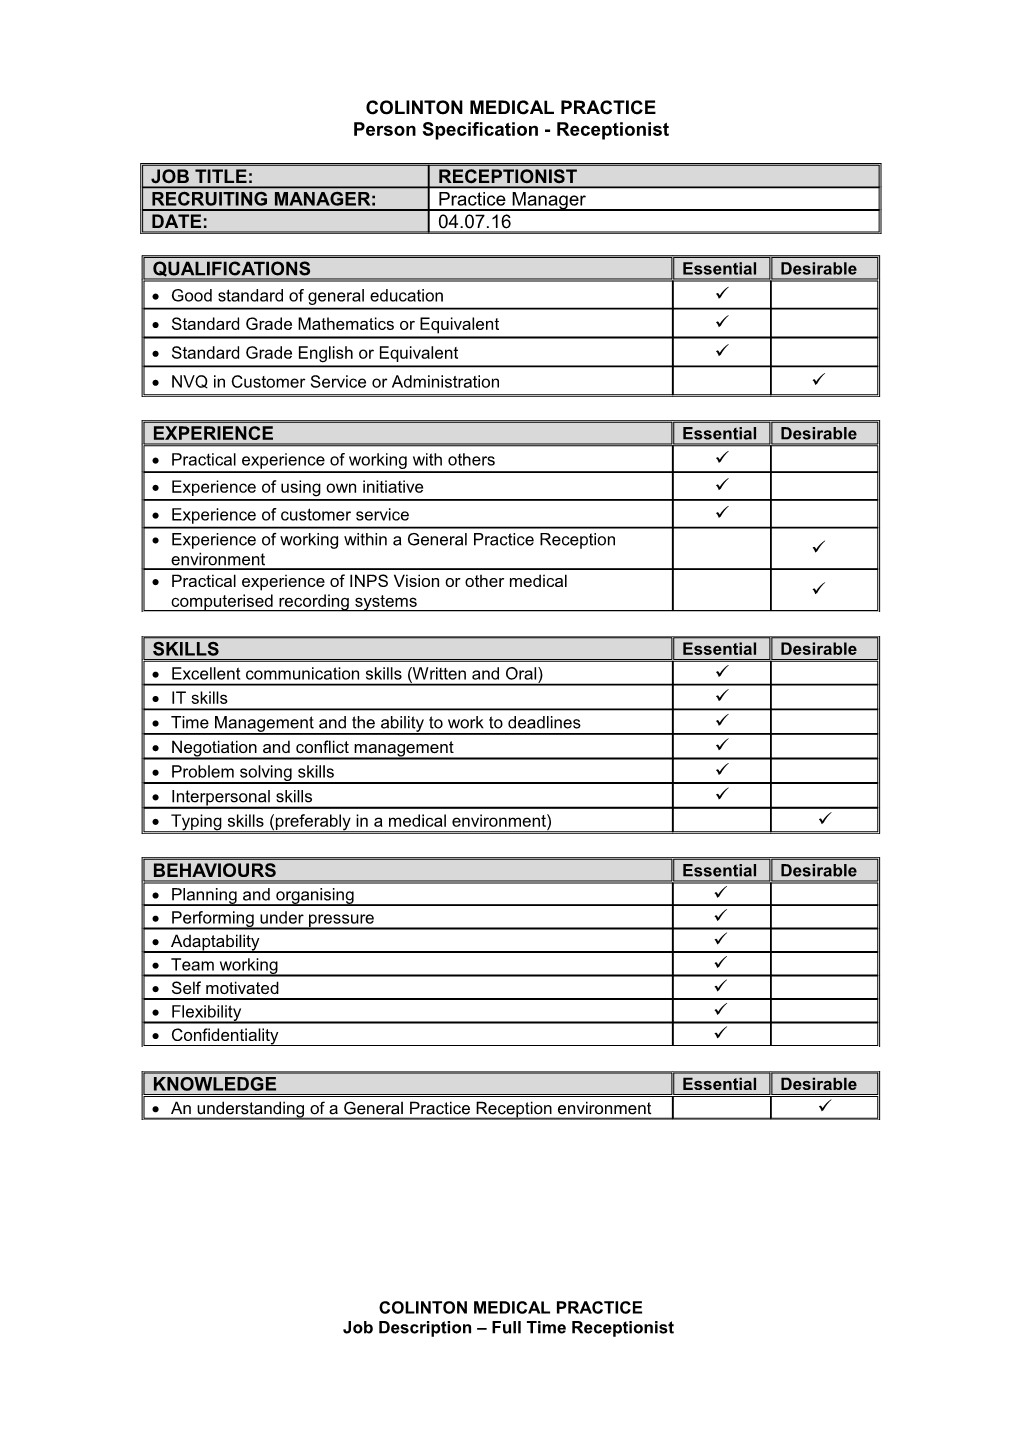 Receptionist - Person Specification